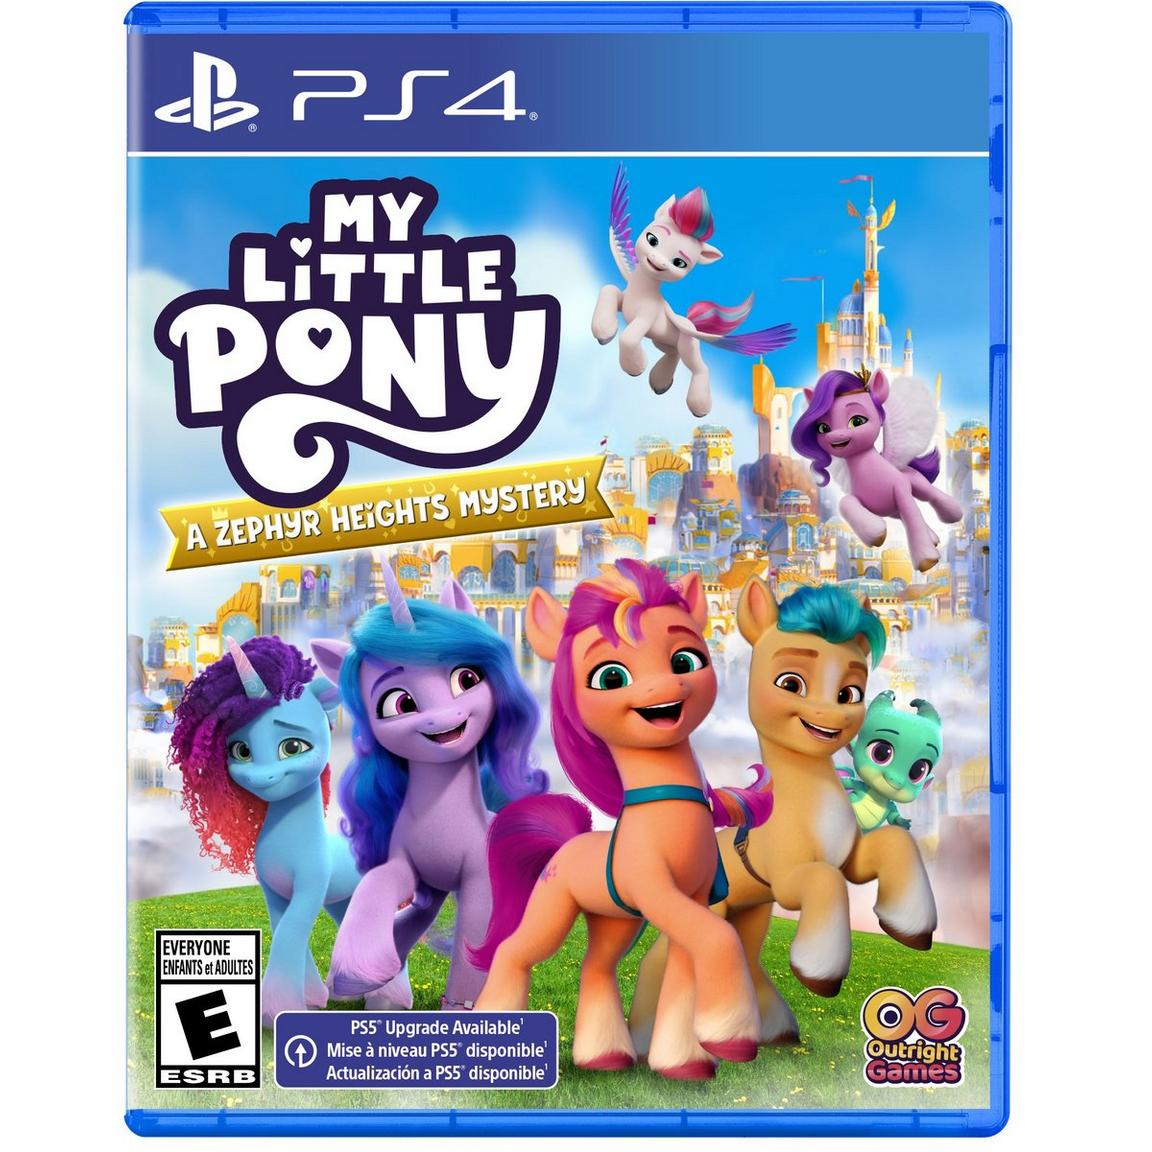 My Little Pony: A Zephyr Heights Mystery - PlayStation 4